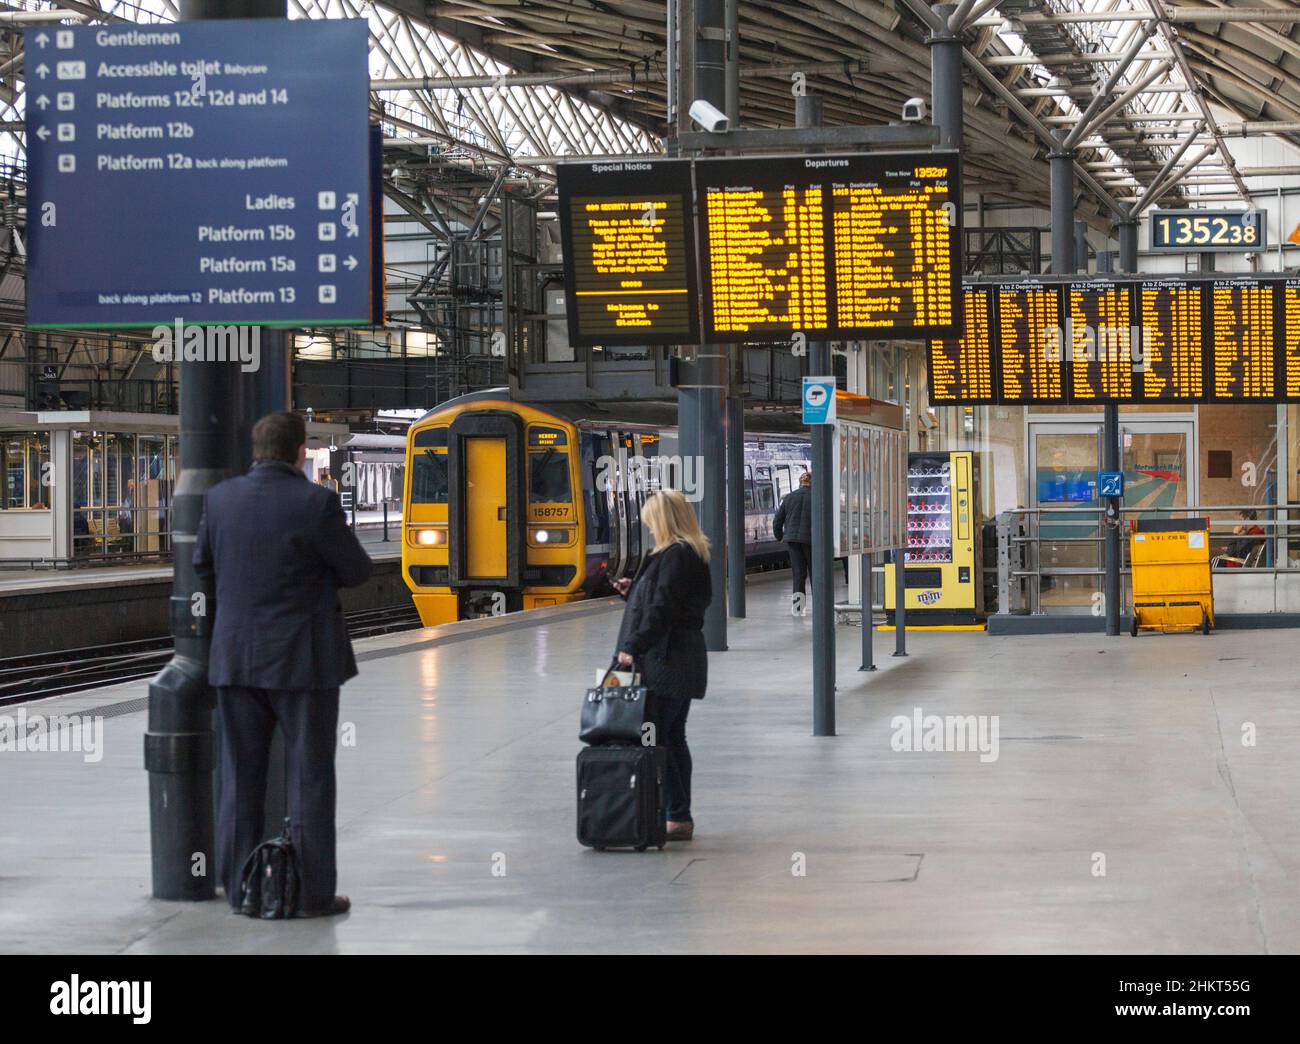 Northern rail class 158 train 158757 arriving at Leeds railway station with passenger information screens and waiting passengers Stock Photo